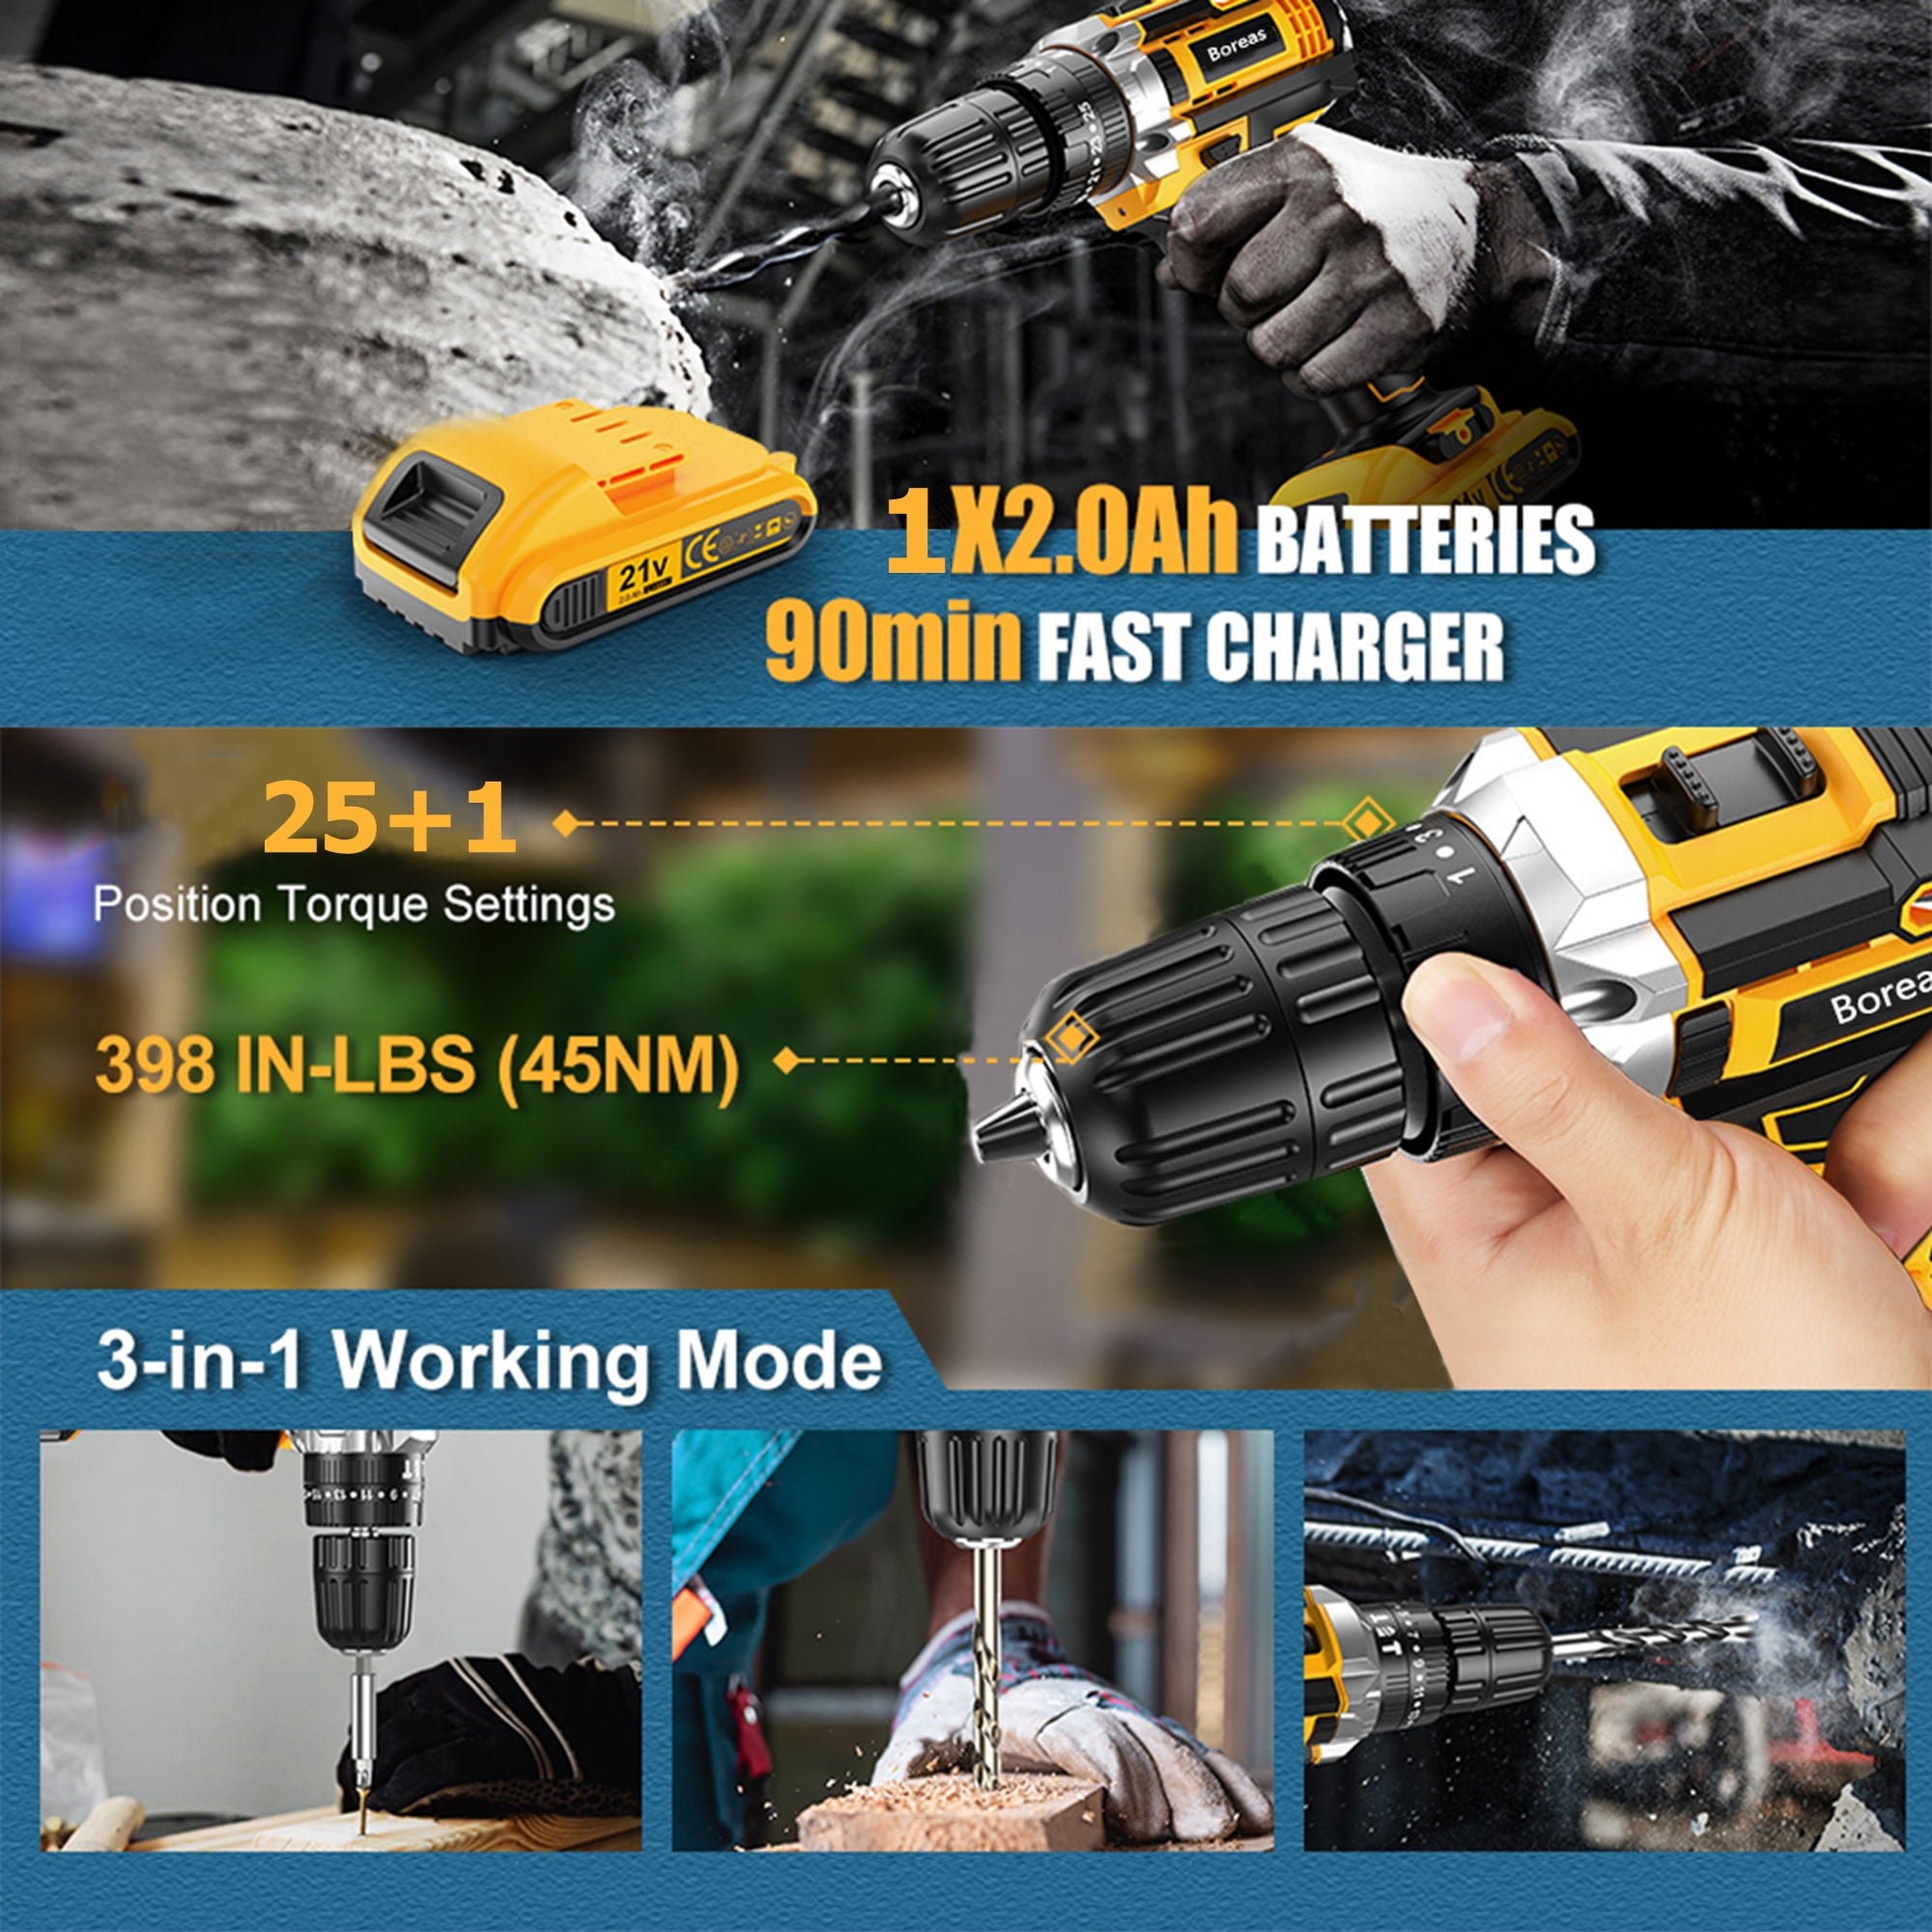 Boreas Cordless Drill Set, 12V Electric Drill Driver with 42 Acessories,  Home Power Drill Cordless with 3/8 Keyless Chuck, 2 Speed, 18+1 Position,  Built-in LED, Clutch Drill for Home DIY Projects 